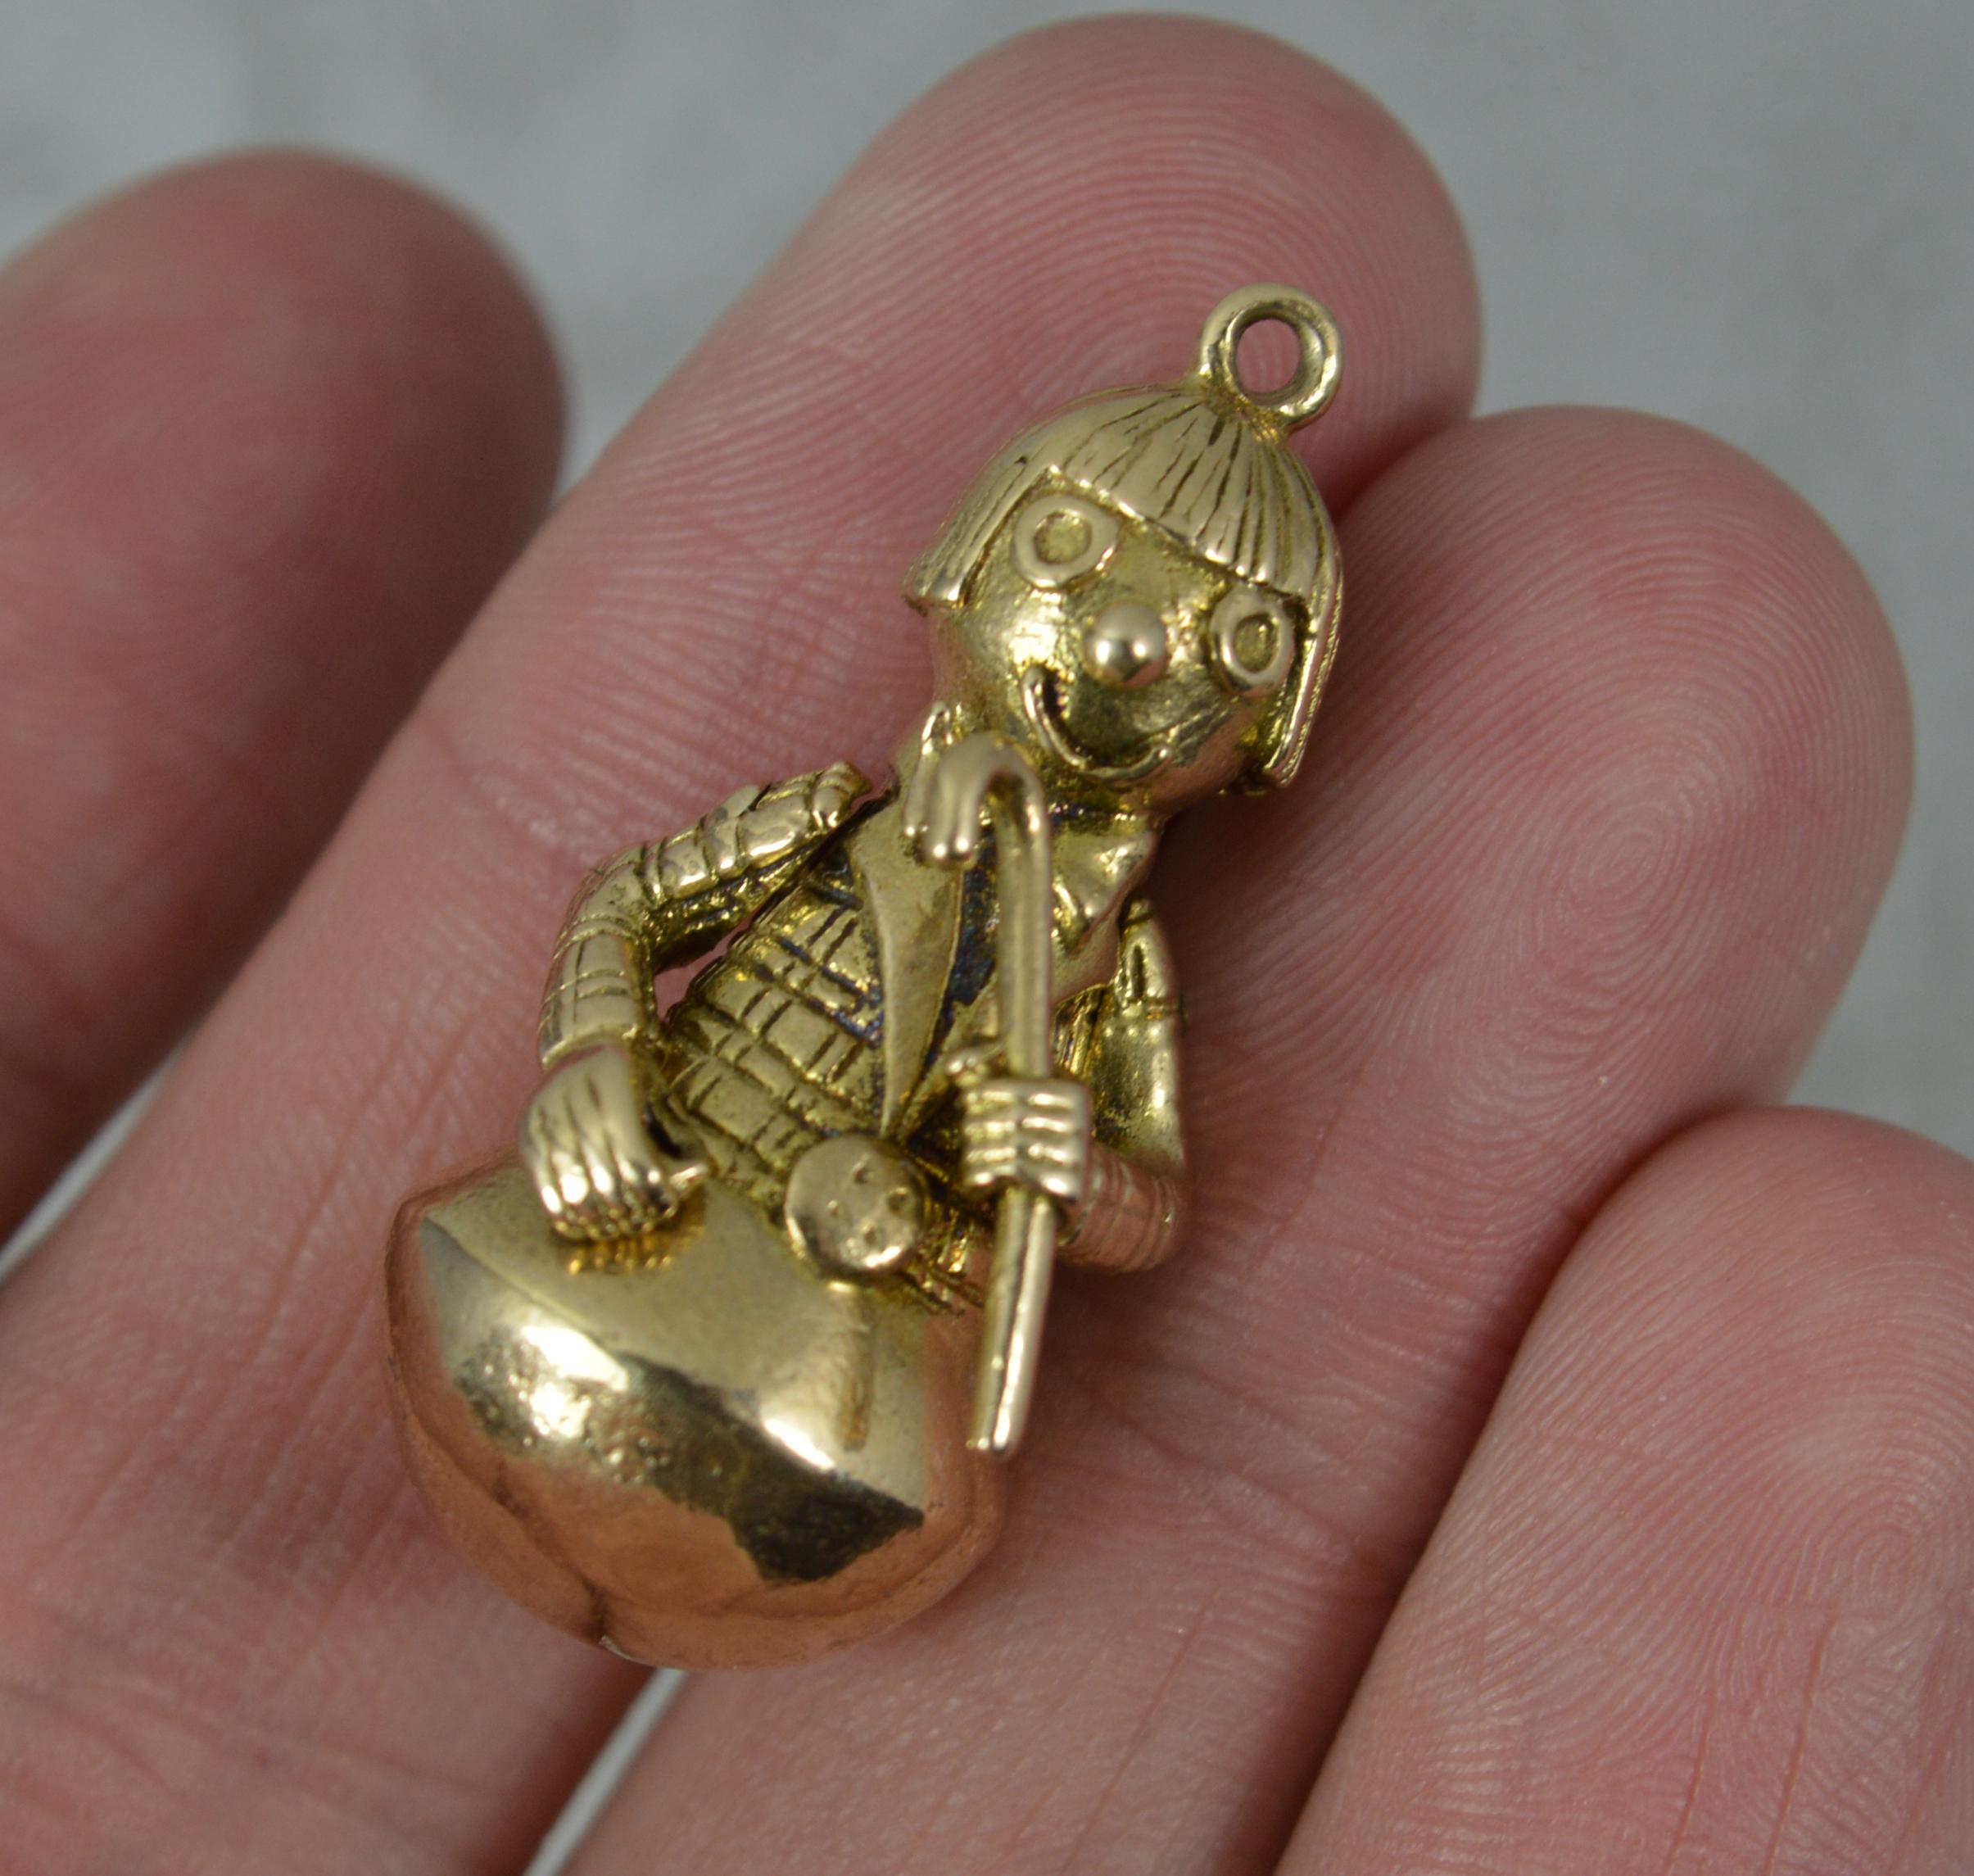 A solid 9 carat yellow gold charm pendant.
Heavy example.
Designed as a fairly creeper looking character.
Articulated arms.
Condition ; Very good. Crisp design. Working arms. Small dents to base.

Please view photographs though note they are